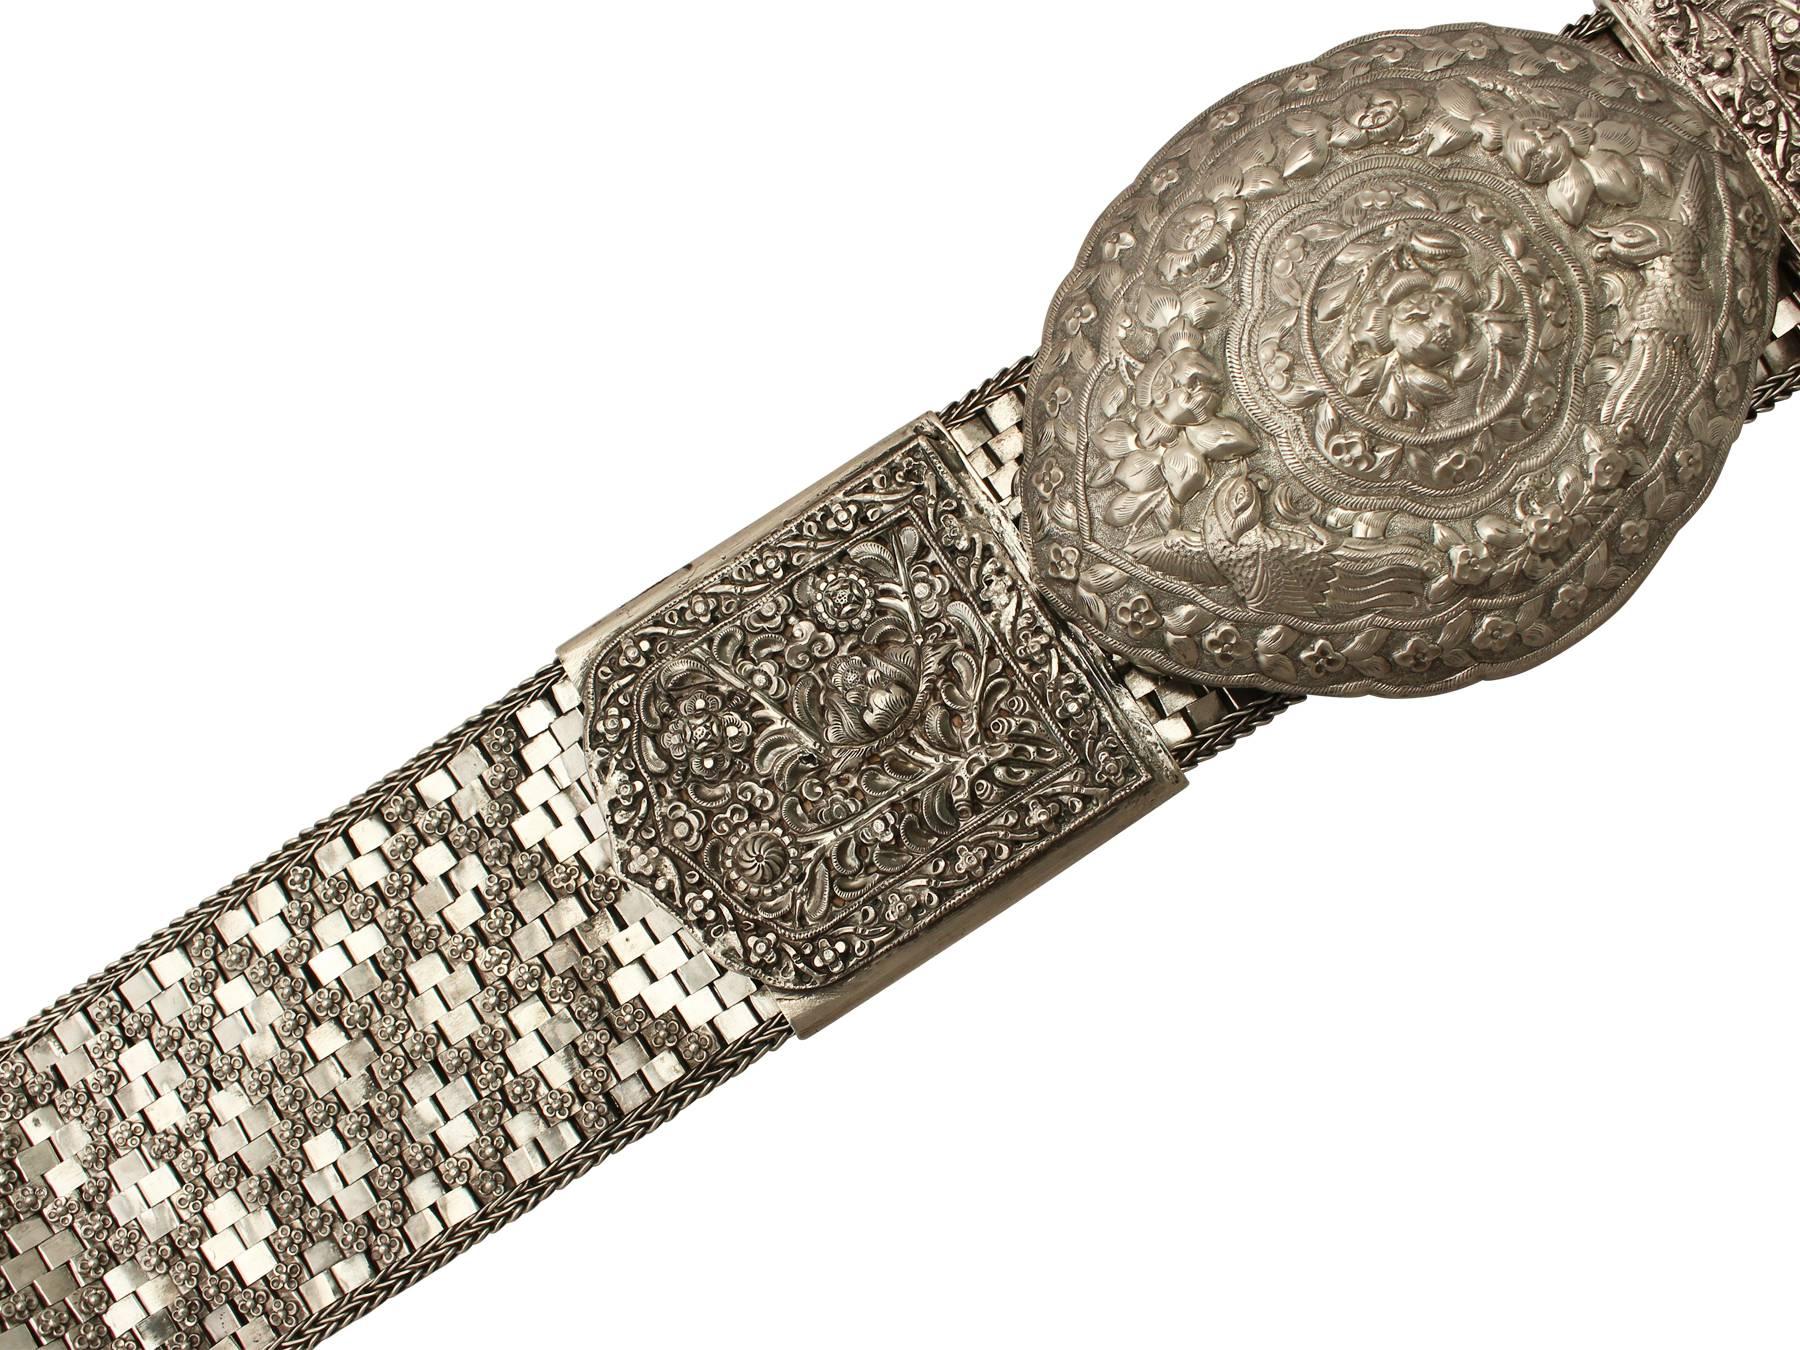 An exceptional, fine and impressive antique Chinese Export silver belt; an addition to our diverse range of Chinese silverware

This exceptional antique Chinese Straits silver belt has a broad articulated form with an oval shaped buckle.

The